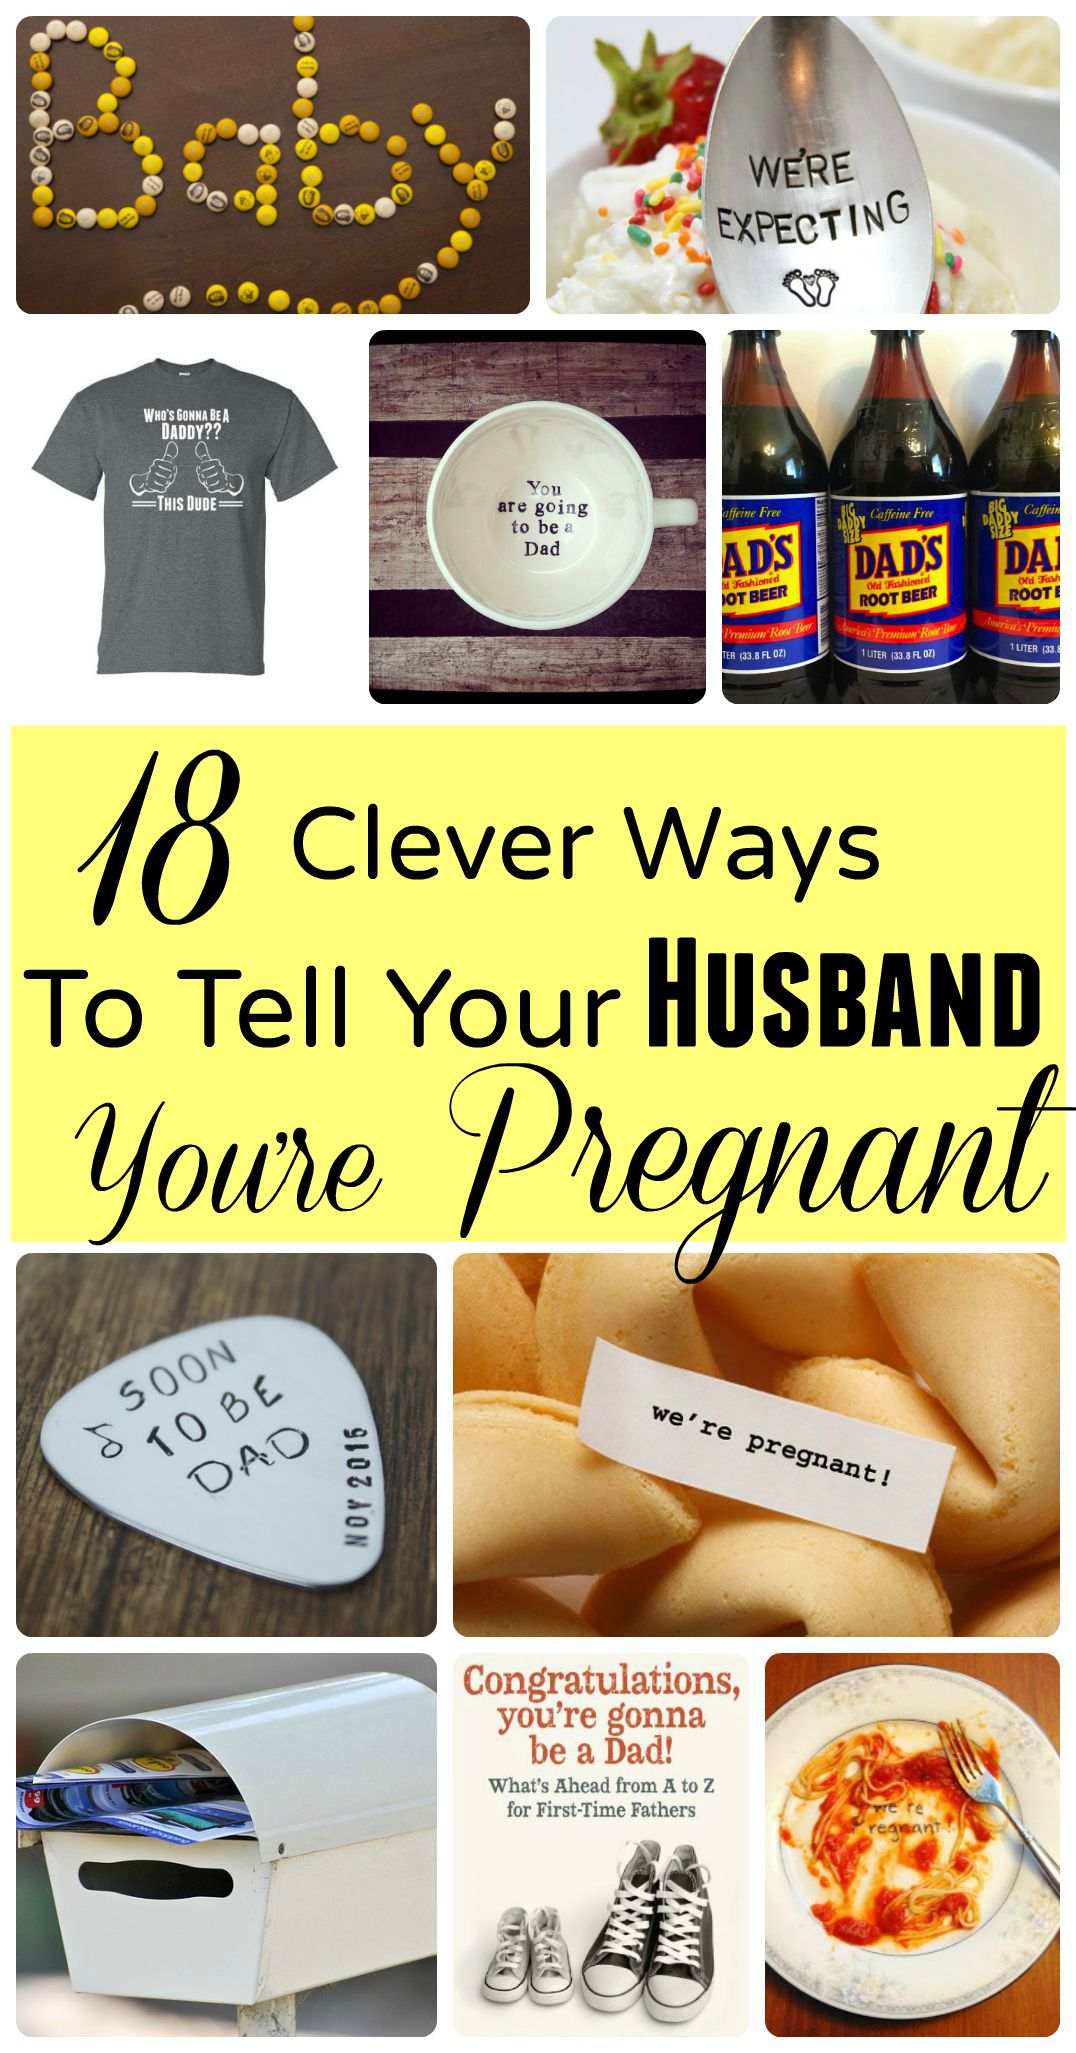 clever-ways-to-tell-your-husband-you-re-pregnant-pregnancy-announcement